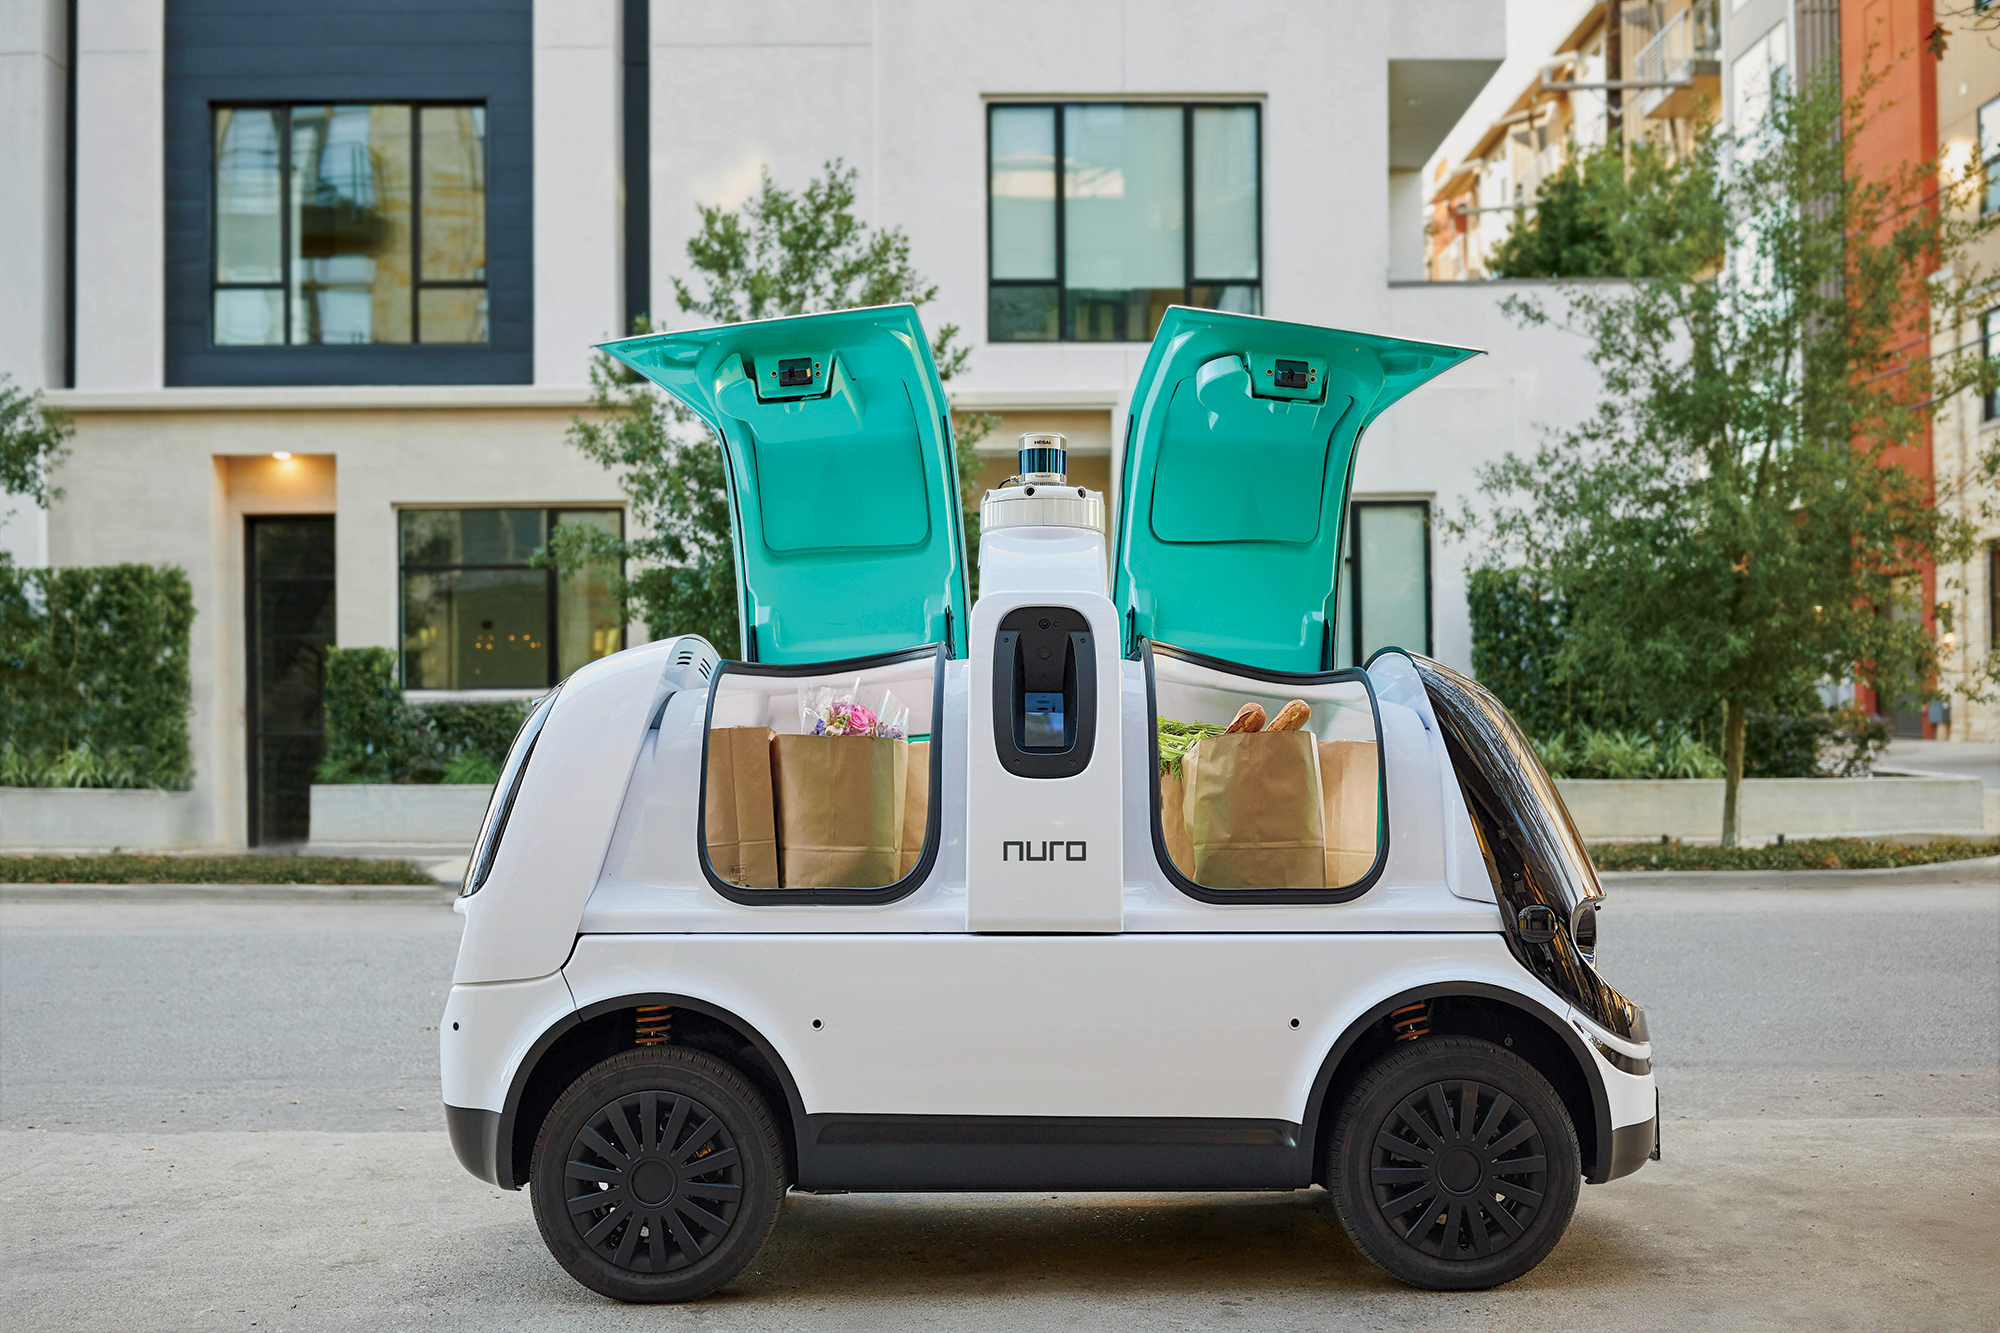 Robot Cars Are Coming, Are Robot Car Shippers Next?